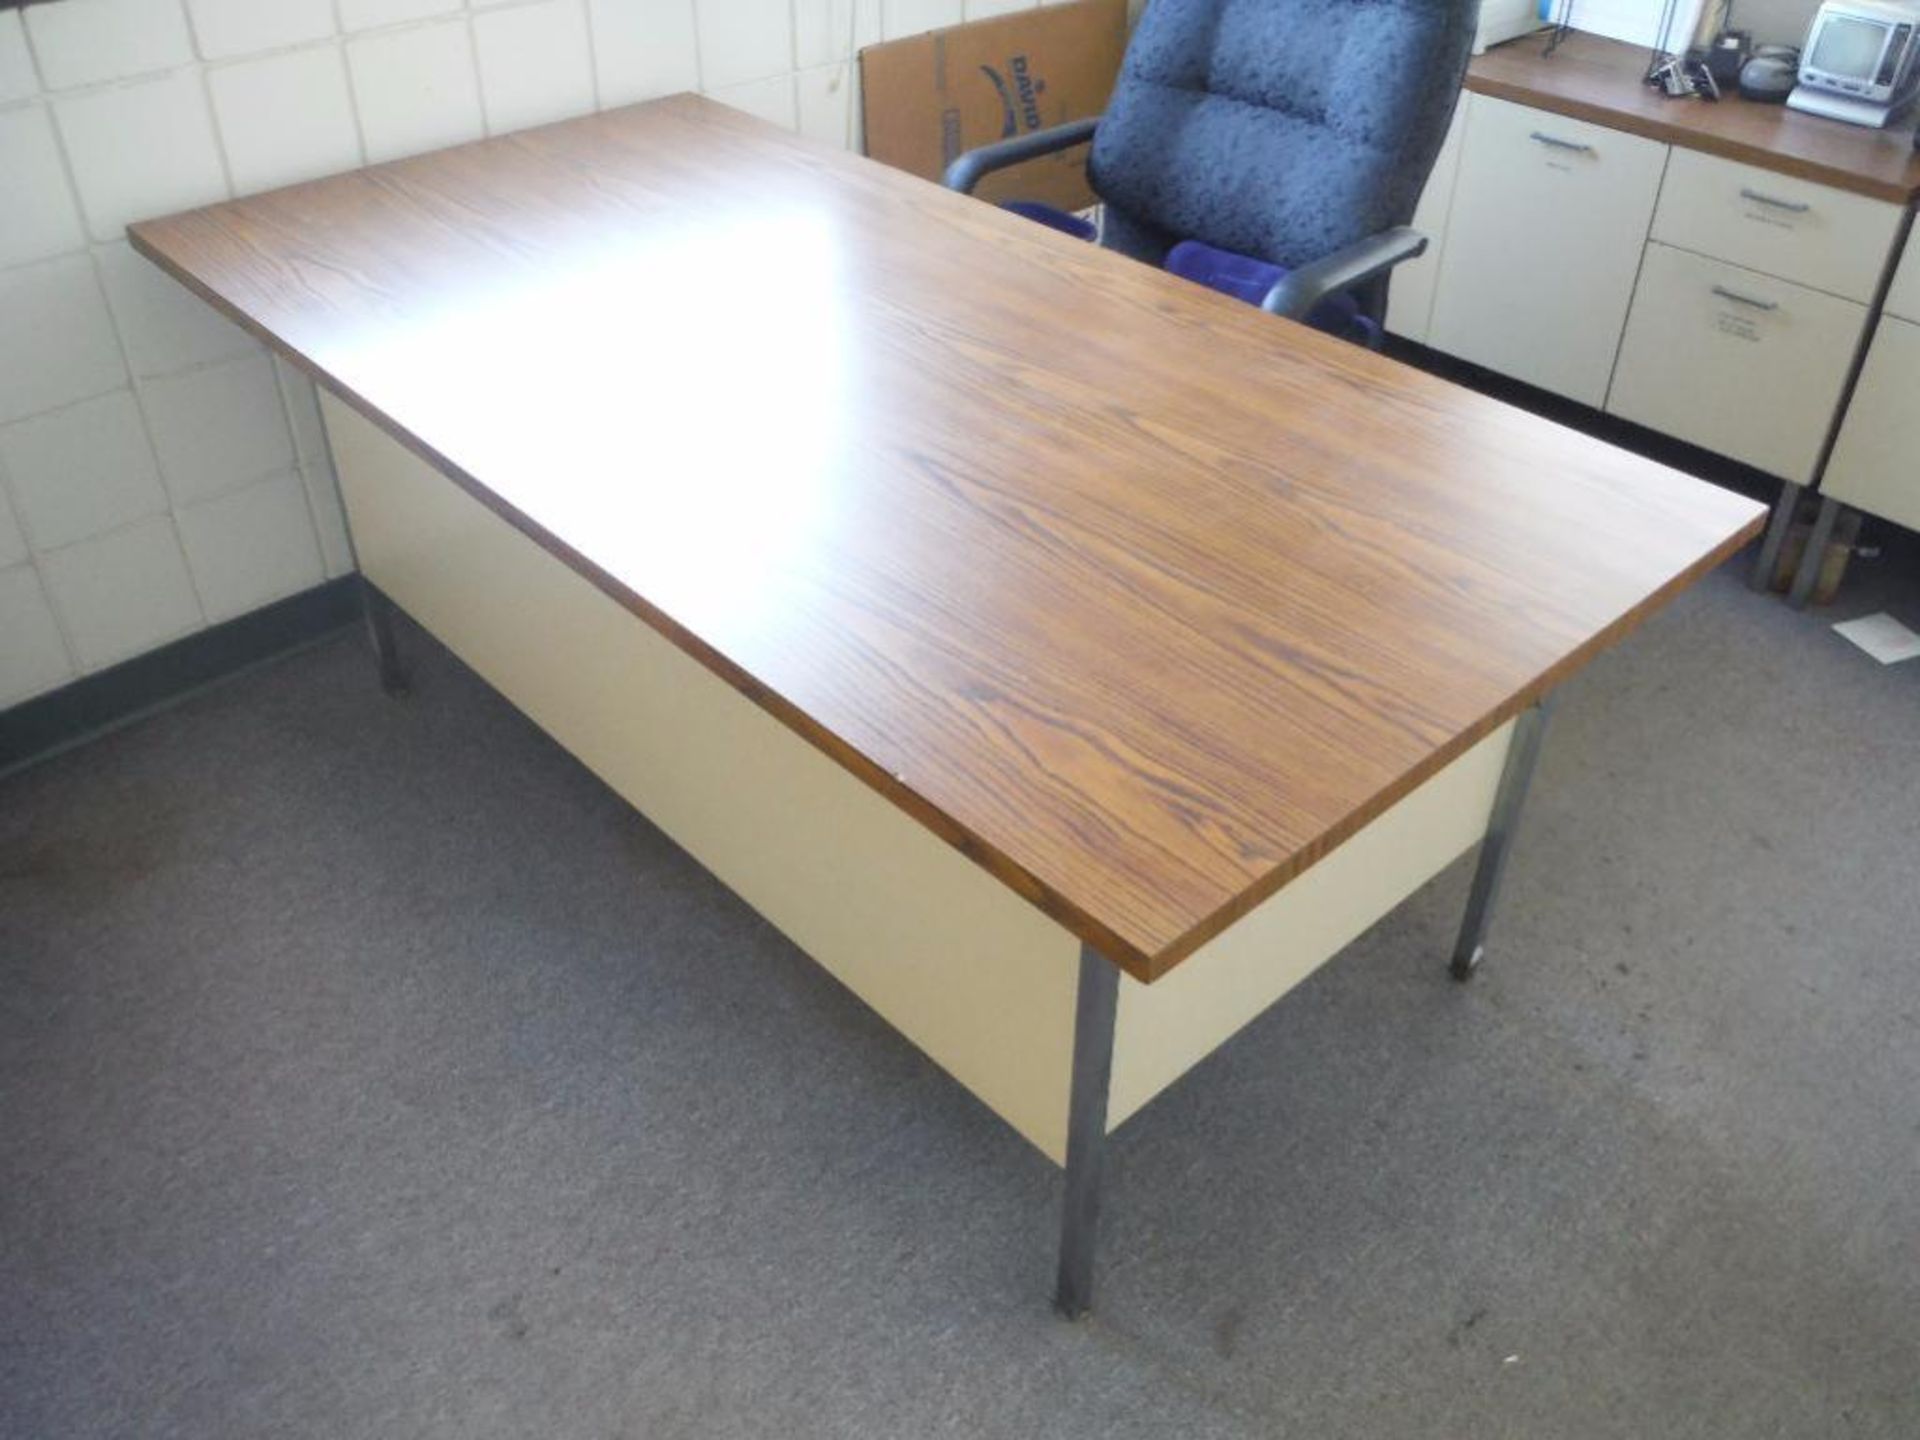 Contents of office, desk, 2 credenzas, 3 chairs, supplies ** Rigging Fee: $250 ** - Image 4 of 6